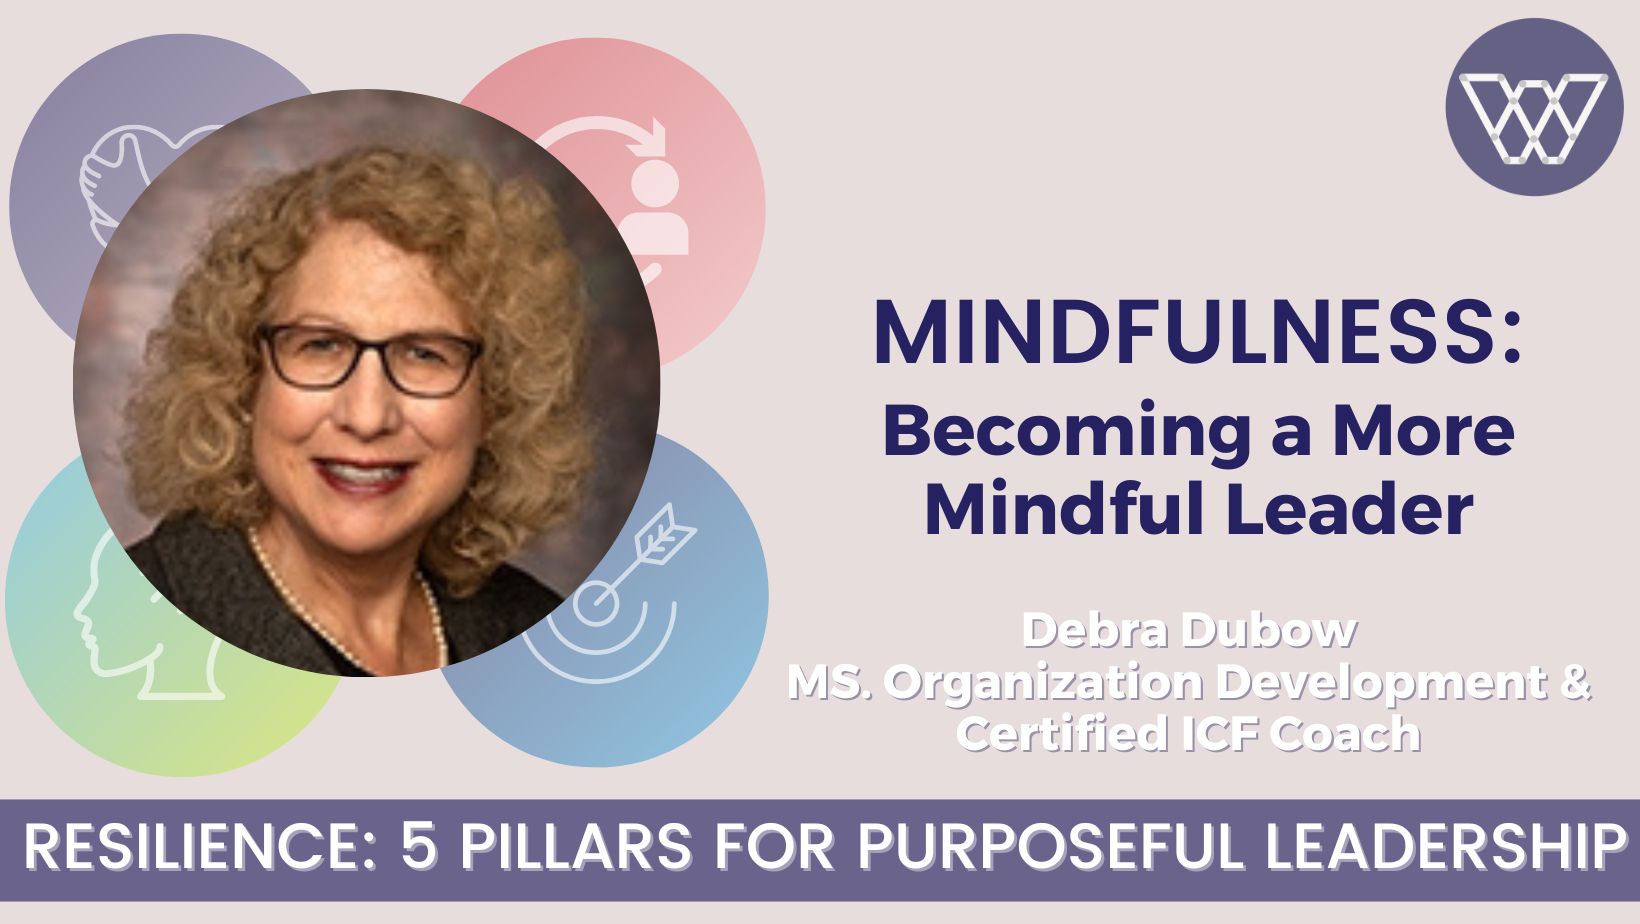 Leadership Study - Mindfulness: Becoming a More Mindful Leader @ Chattanooga State Community College